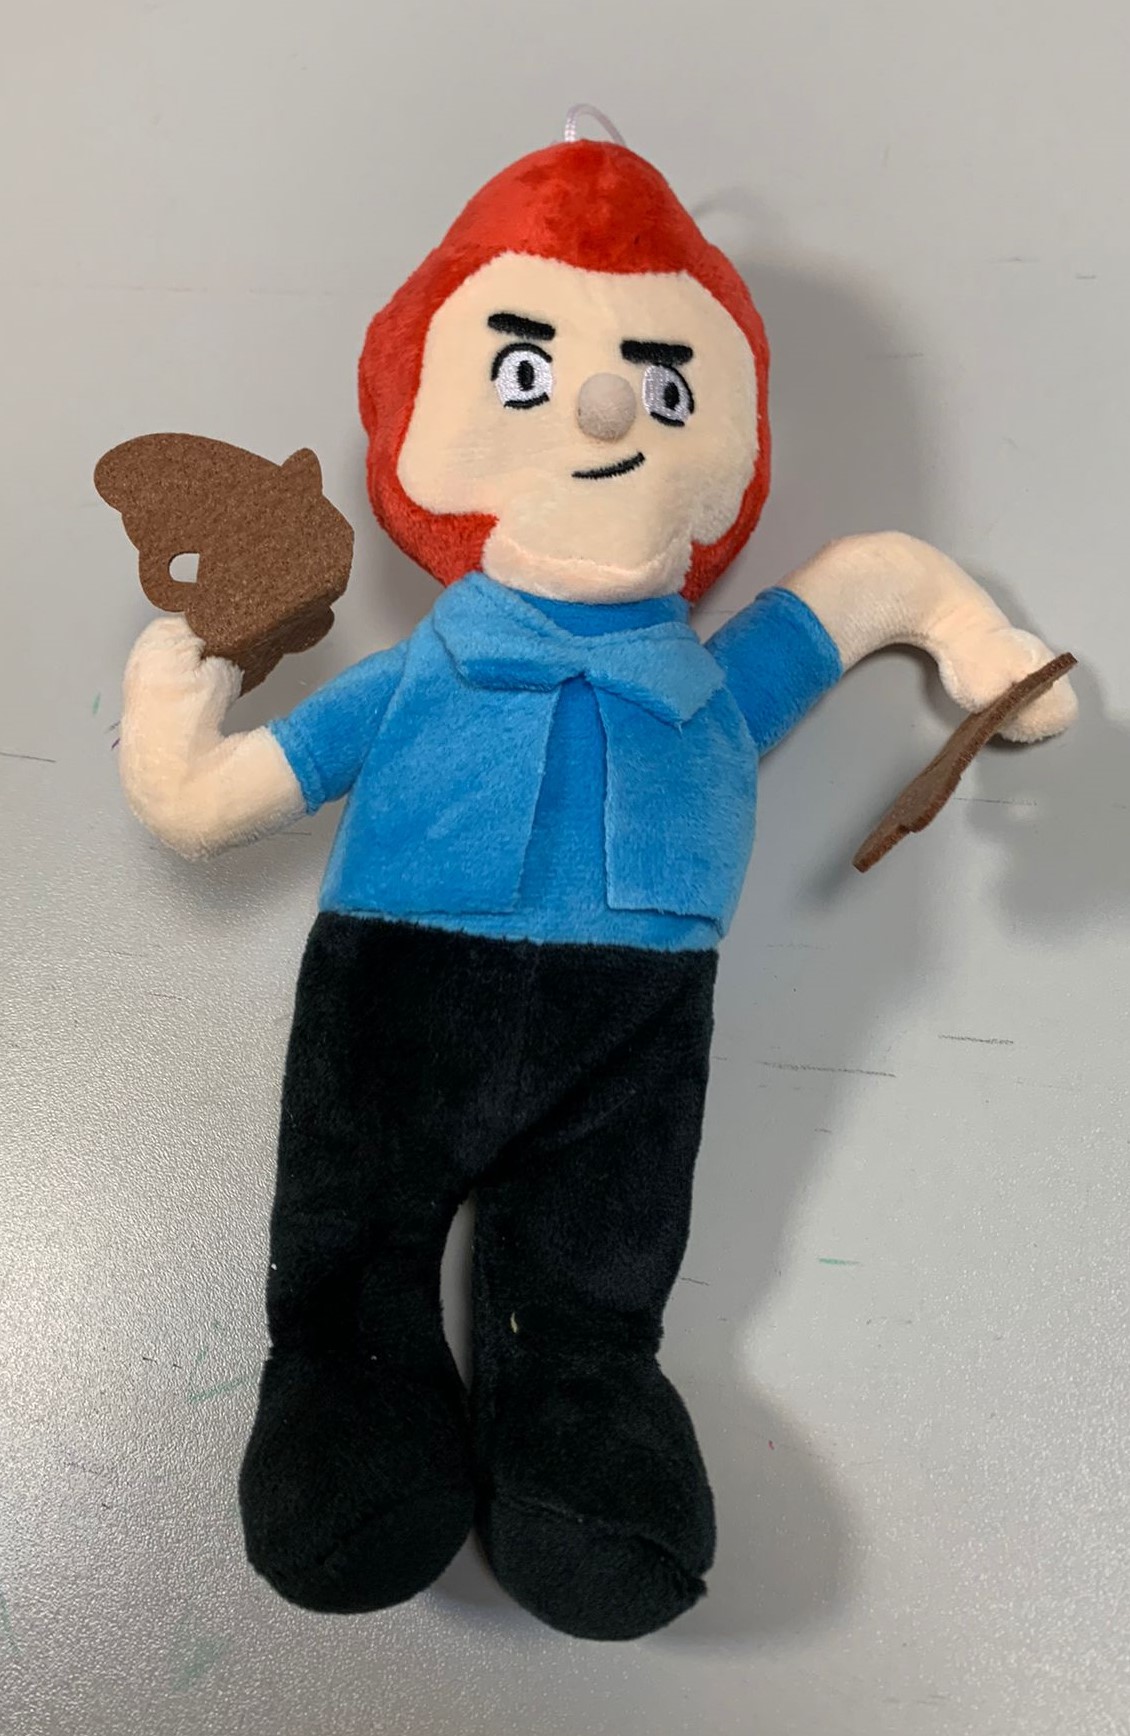 Plush character Colt from the game Brawl Stars